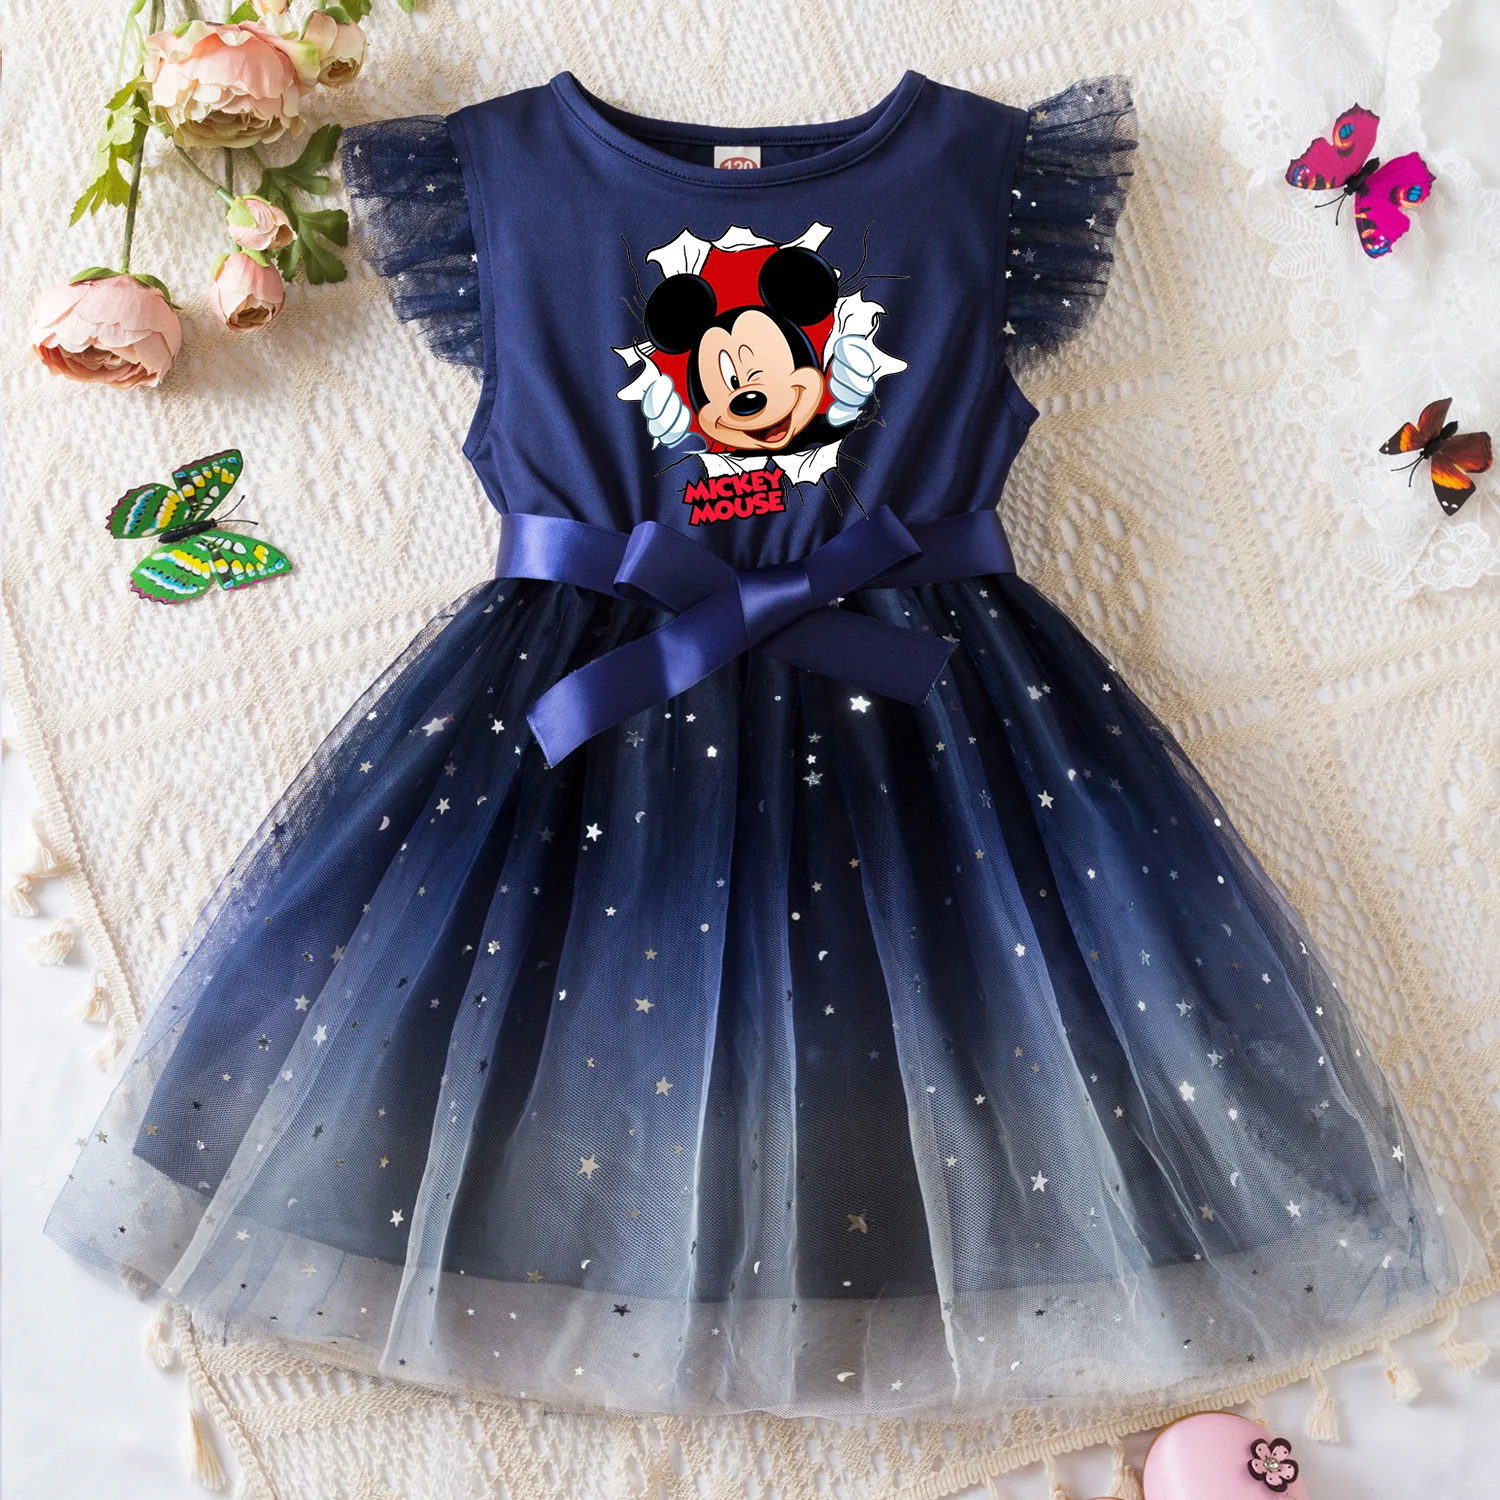 

Mickey Minnie Mouse Summer Toddler Girl Dress Princess Star Baby Girls Clothes Tulle Tutu Dress for Children Party Dress 2-6Y